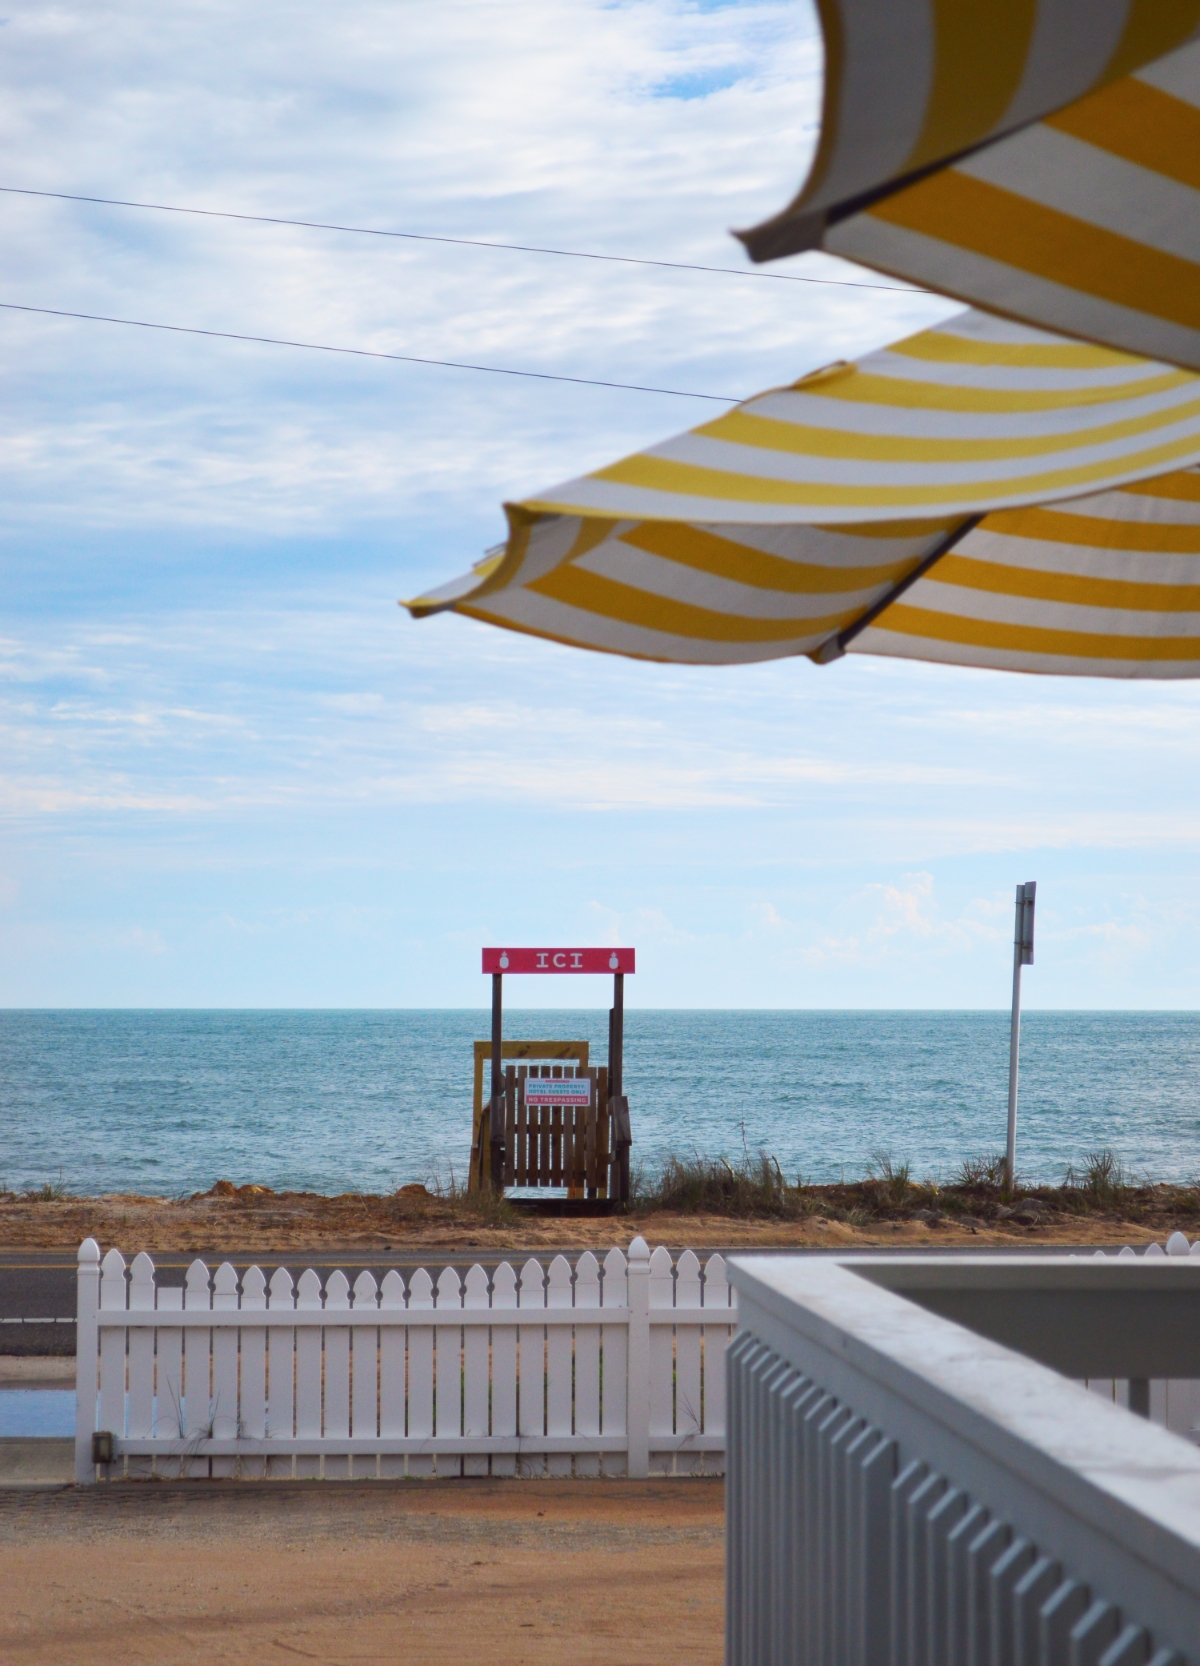 Island Cottage Inn Flagler Beach has its own private beach crossover